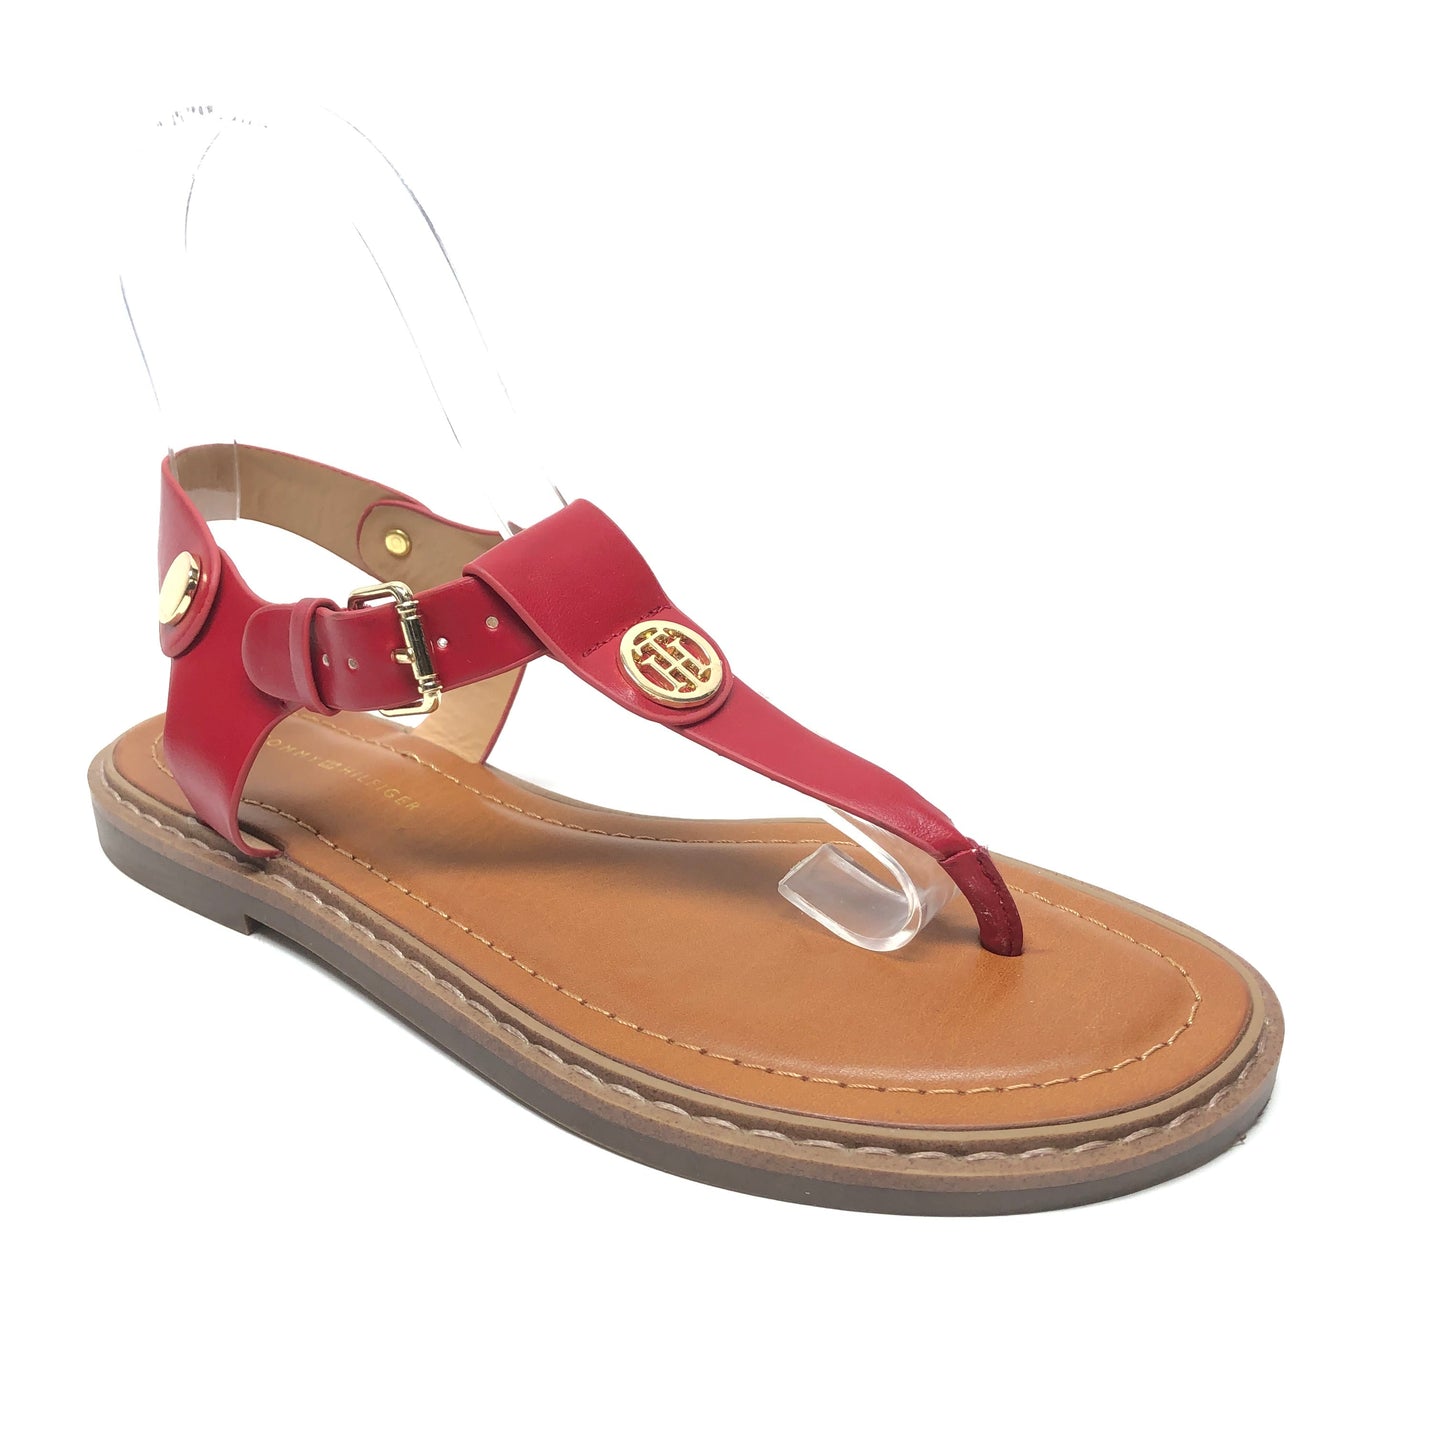 Red Sandals Flats Tommy Hilfiger, Size 6.5